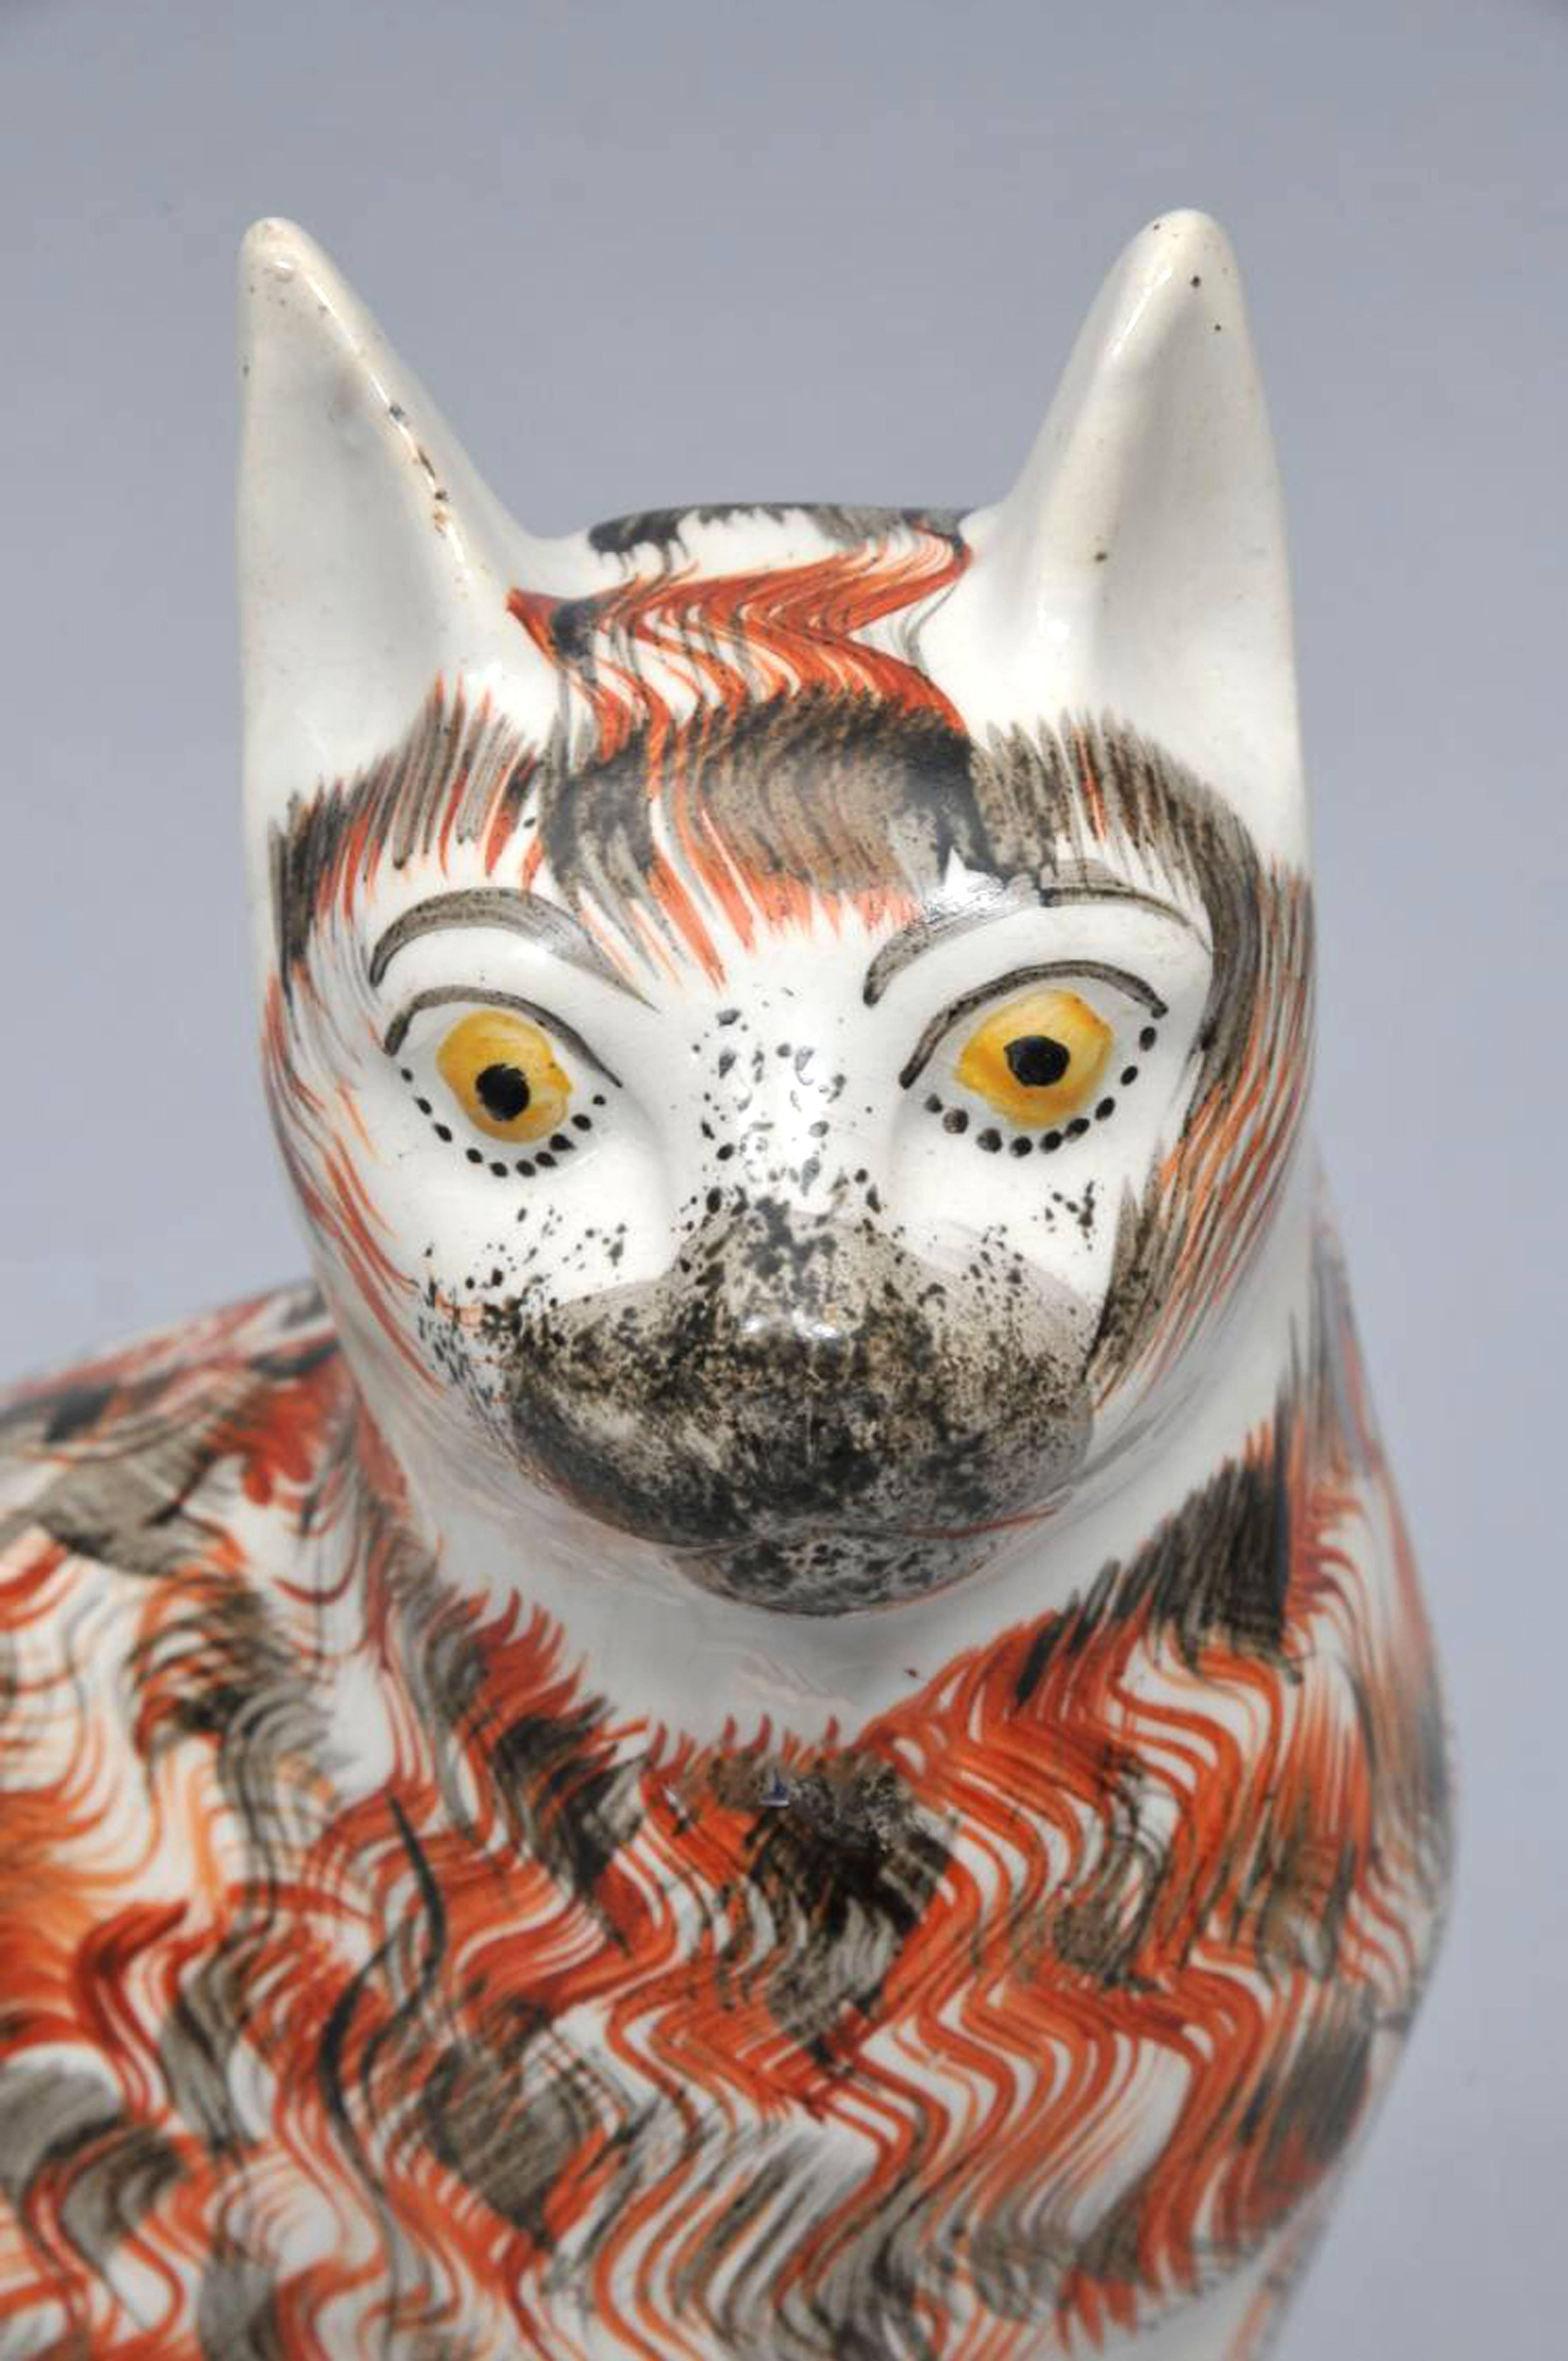 Victorian Staffordshire Pottery Whimsical Cat, circa 1850